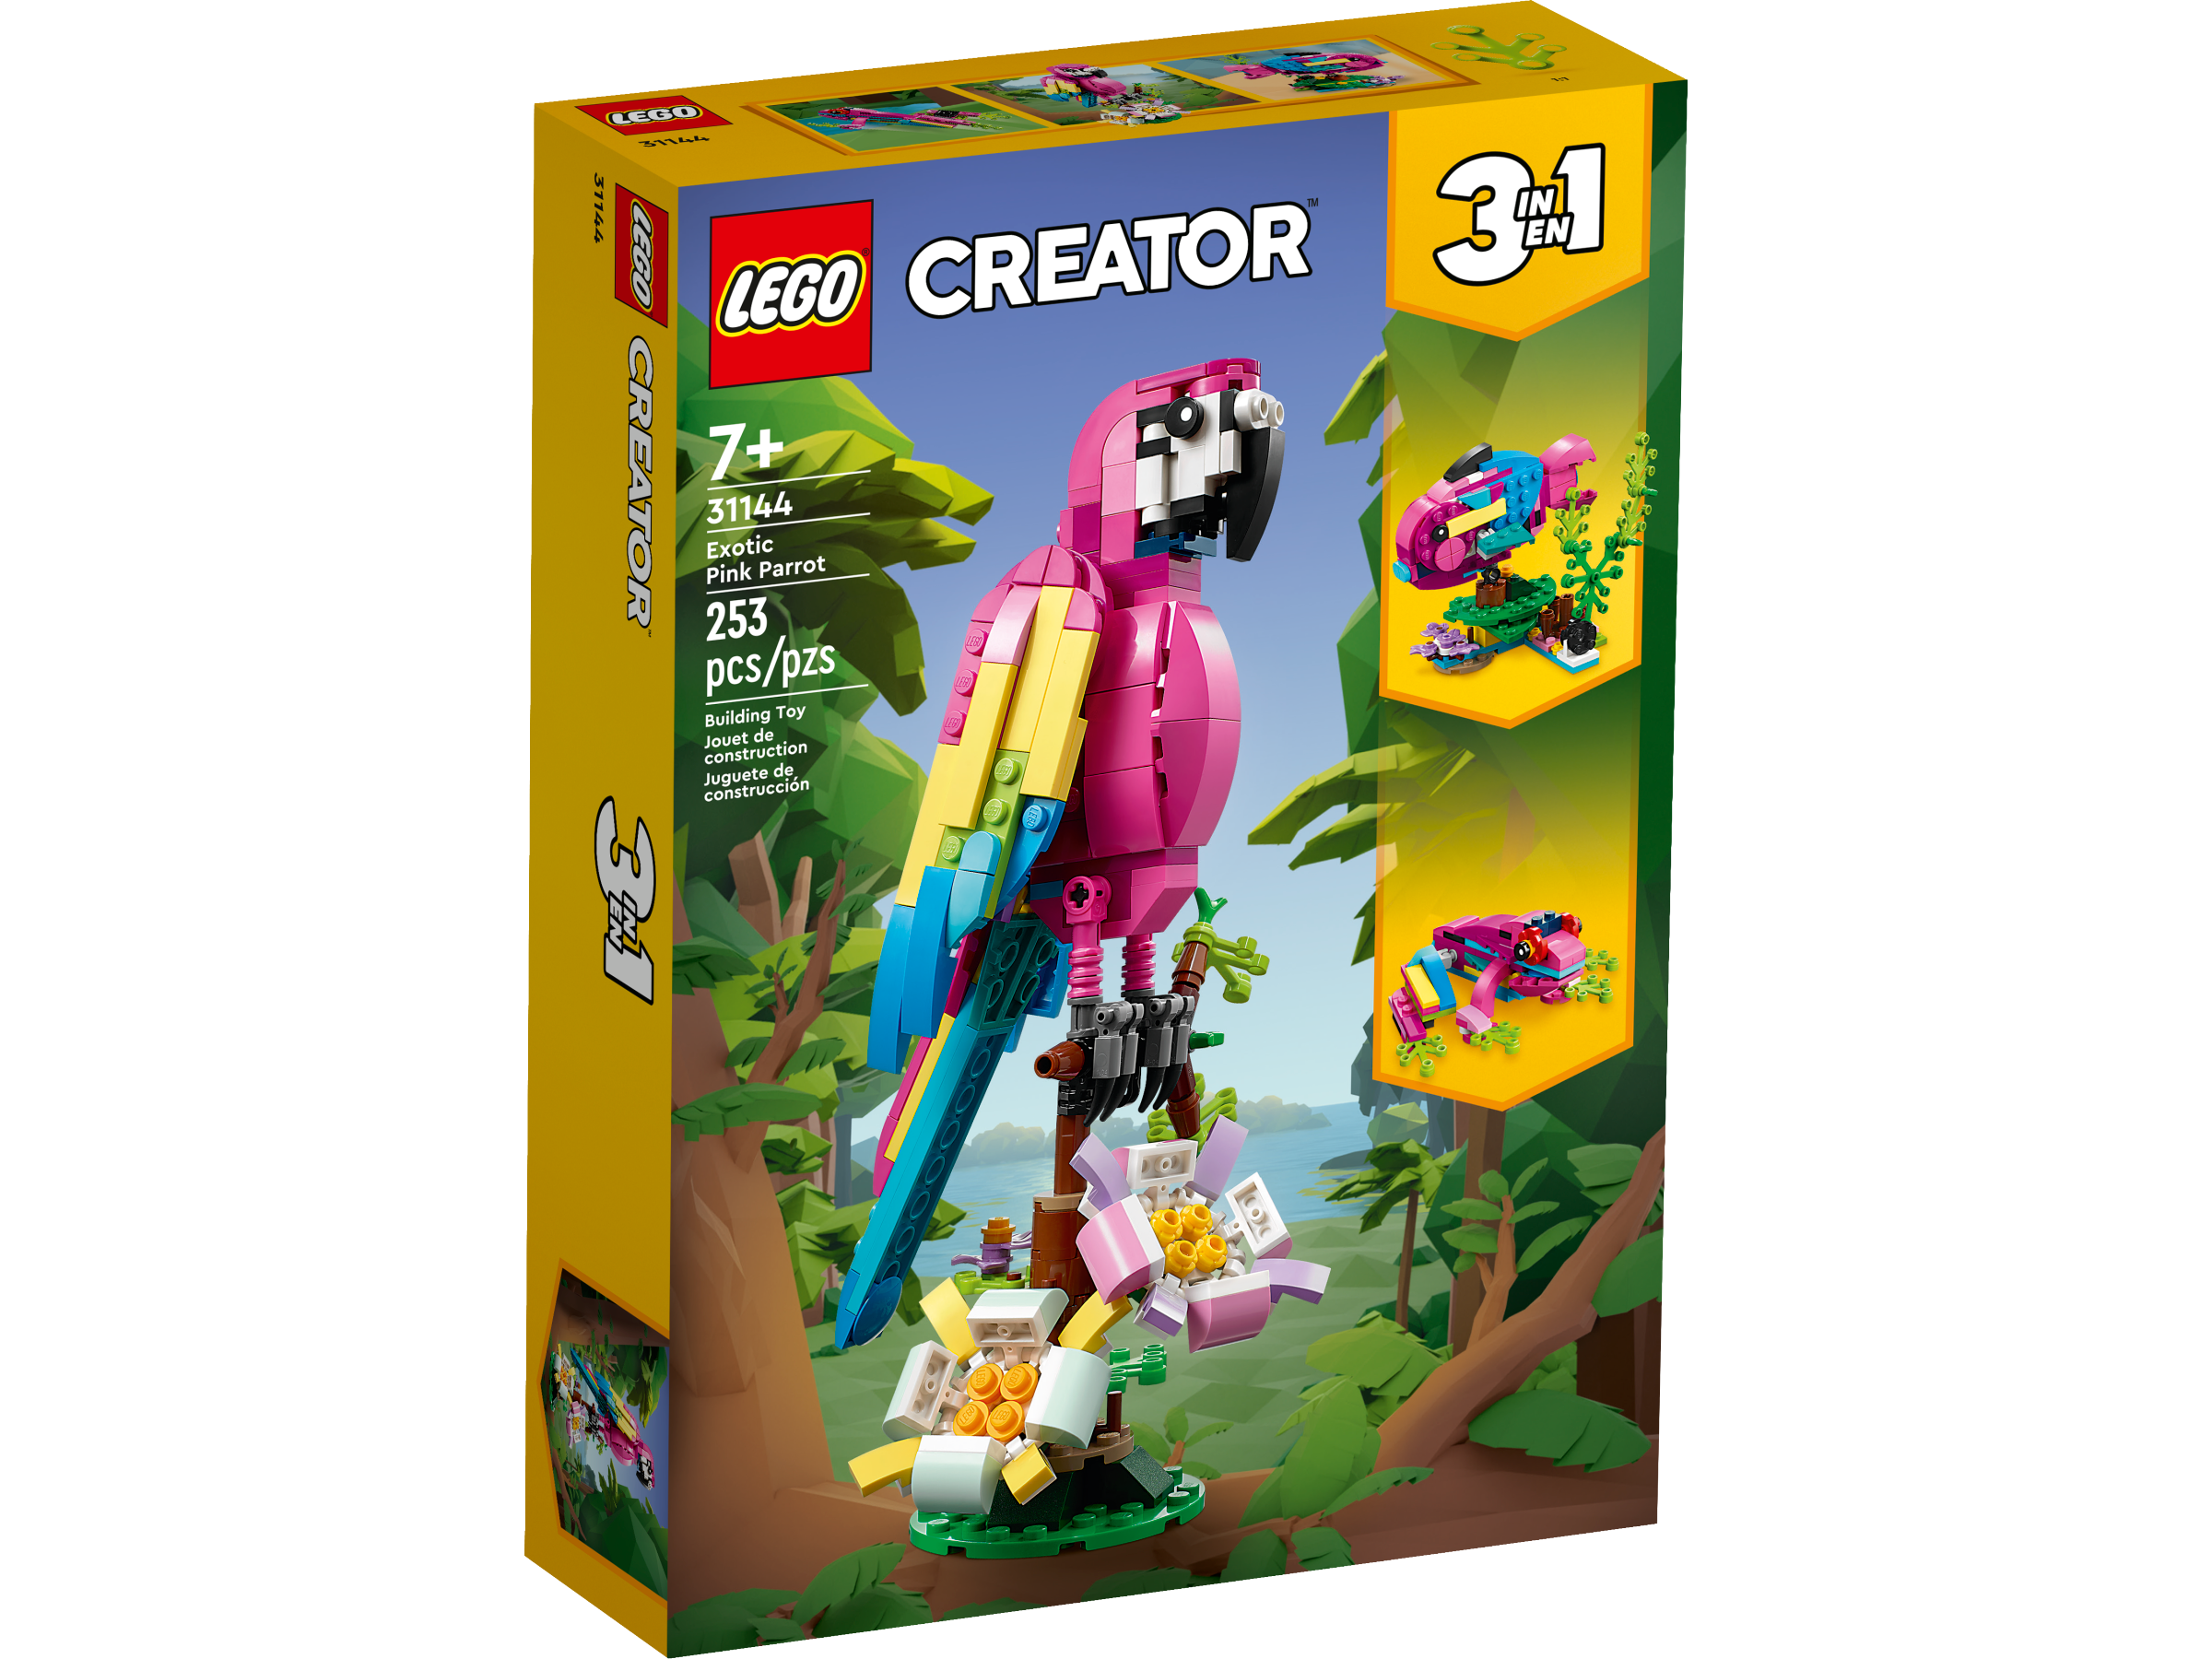 Exotic Pink Parrot 31144 | Creator 3-in-1 | Buy online at the